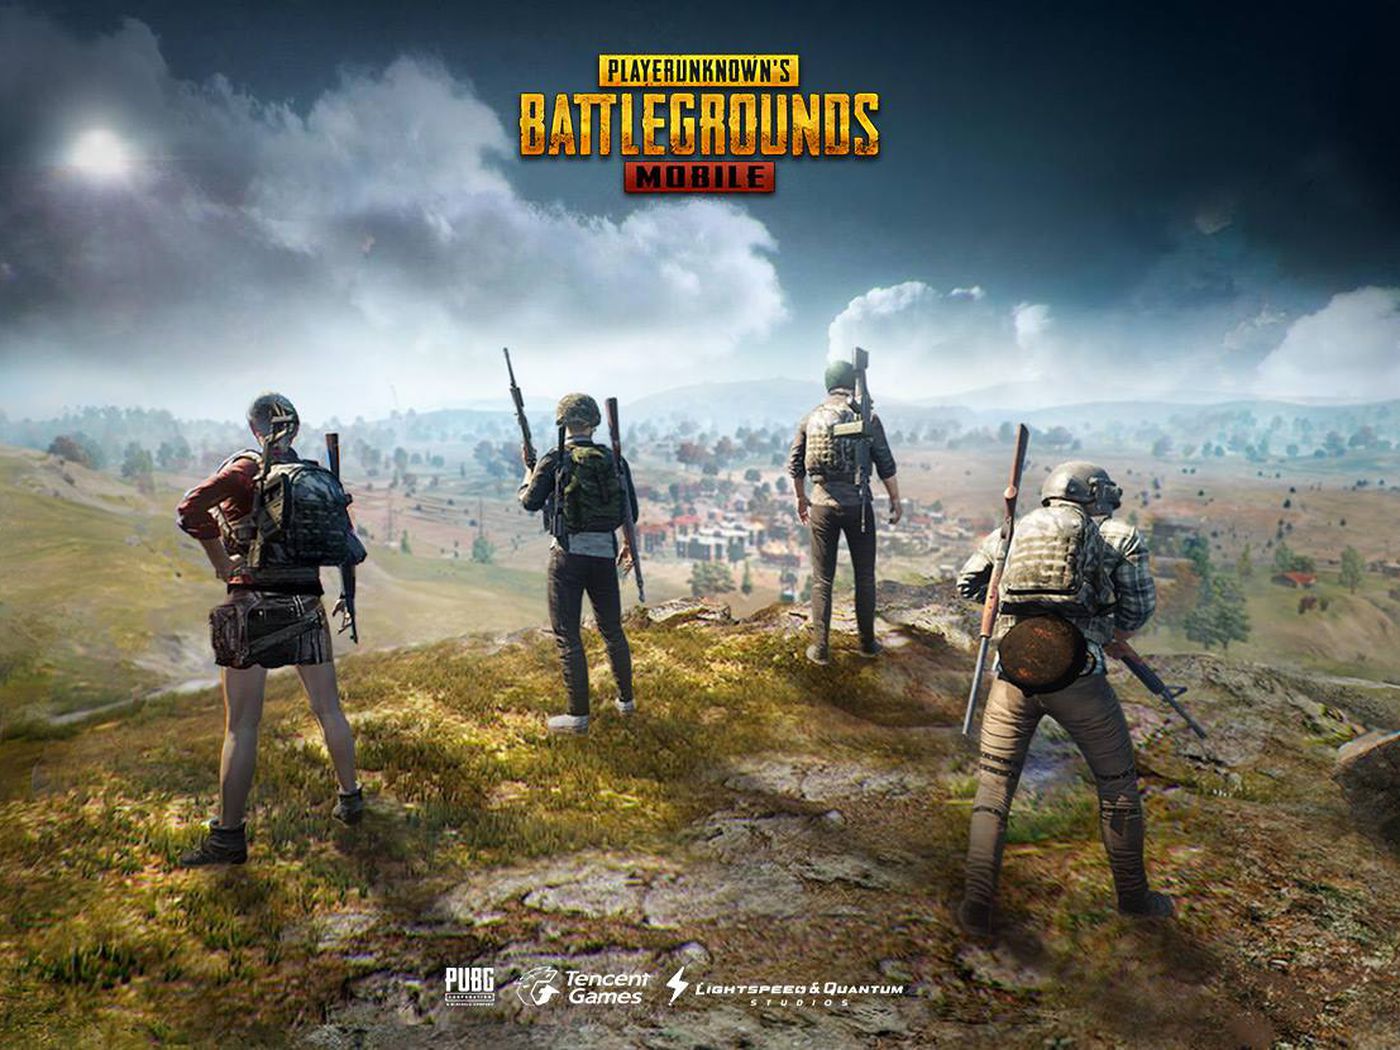 The best free emulator to Play PUBG - Why and how?